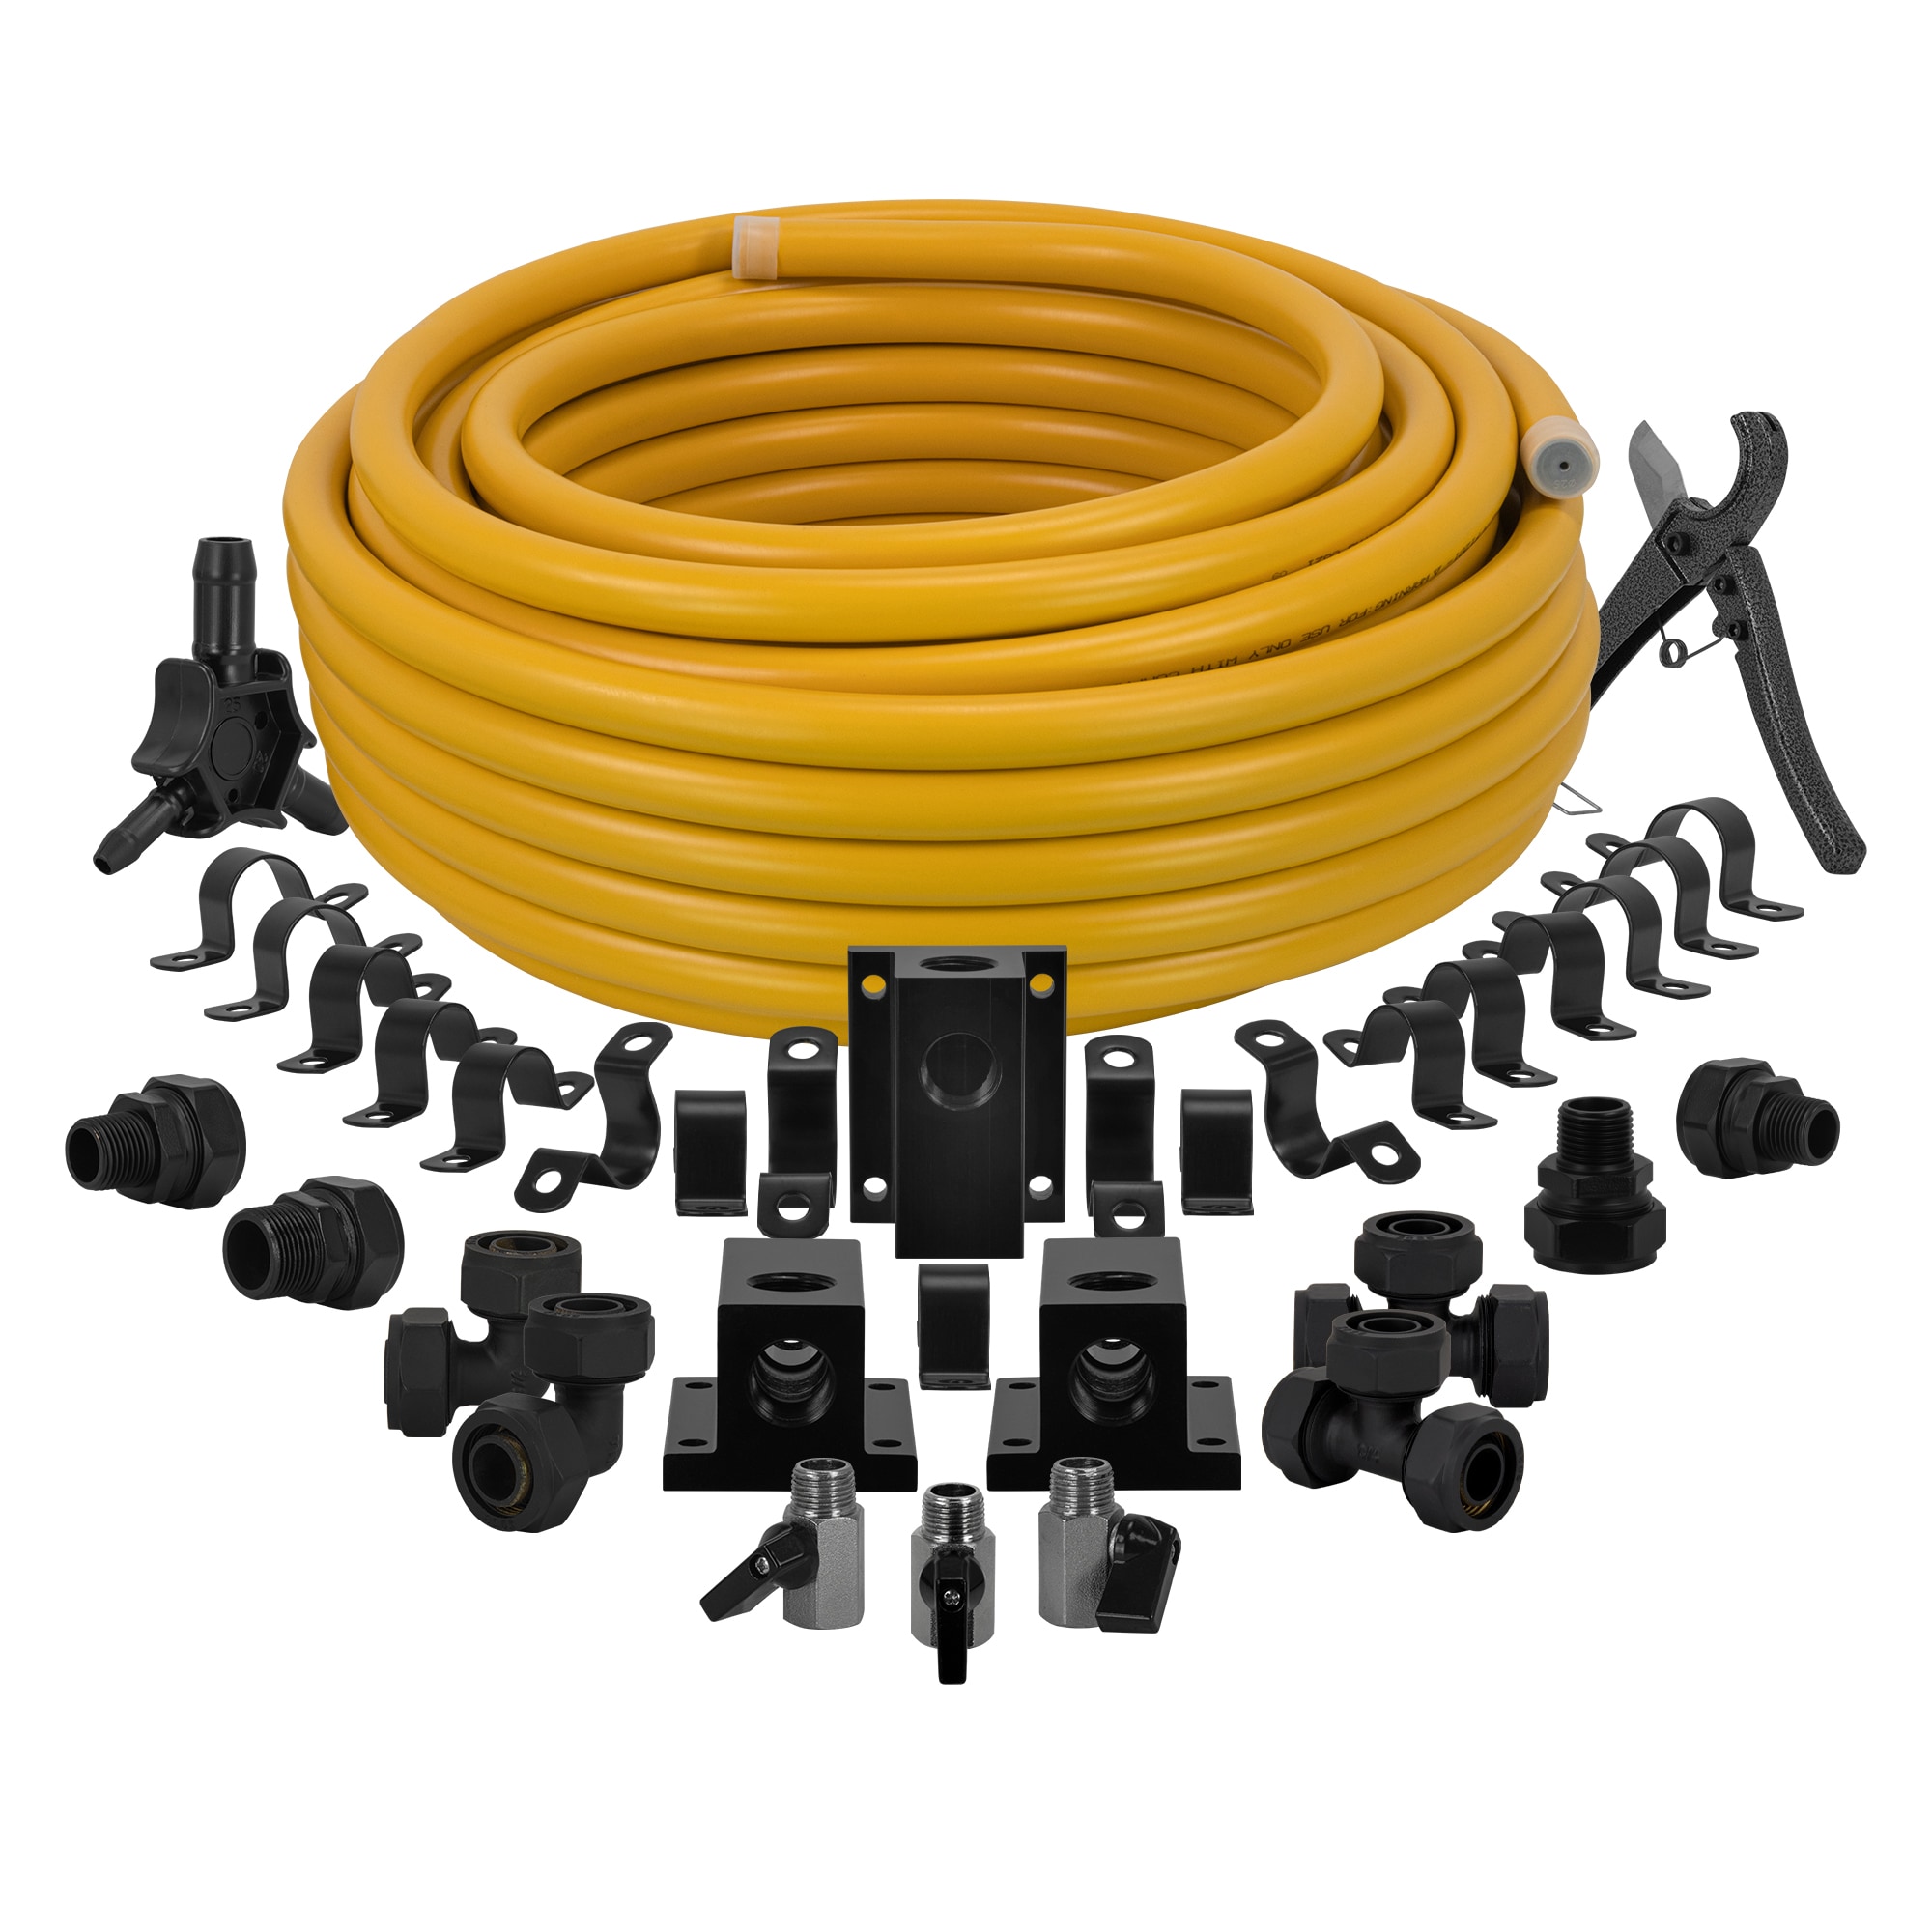 DeWalt DXCM024-0400 3/4 in. x 100 ft. HDPE/Aluminum Air Piping System